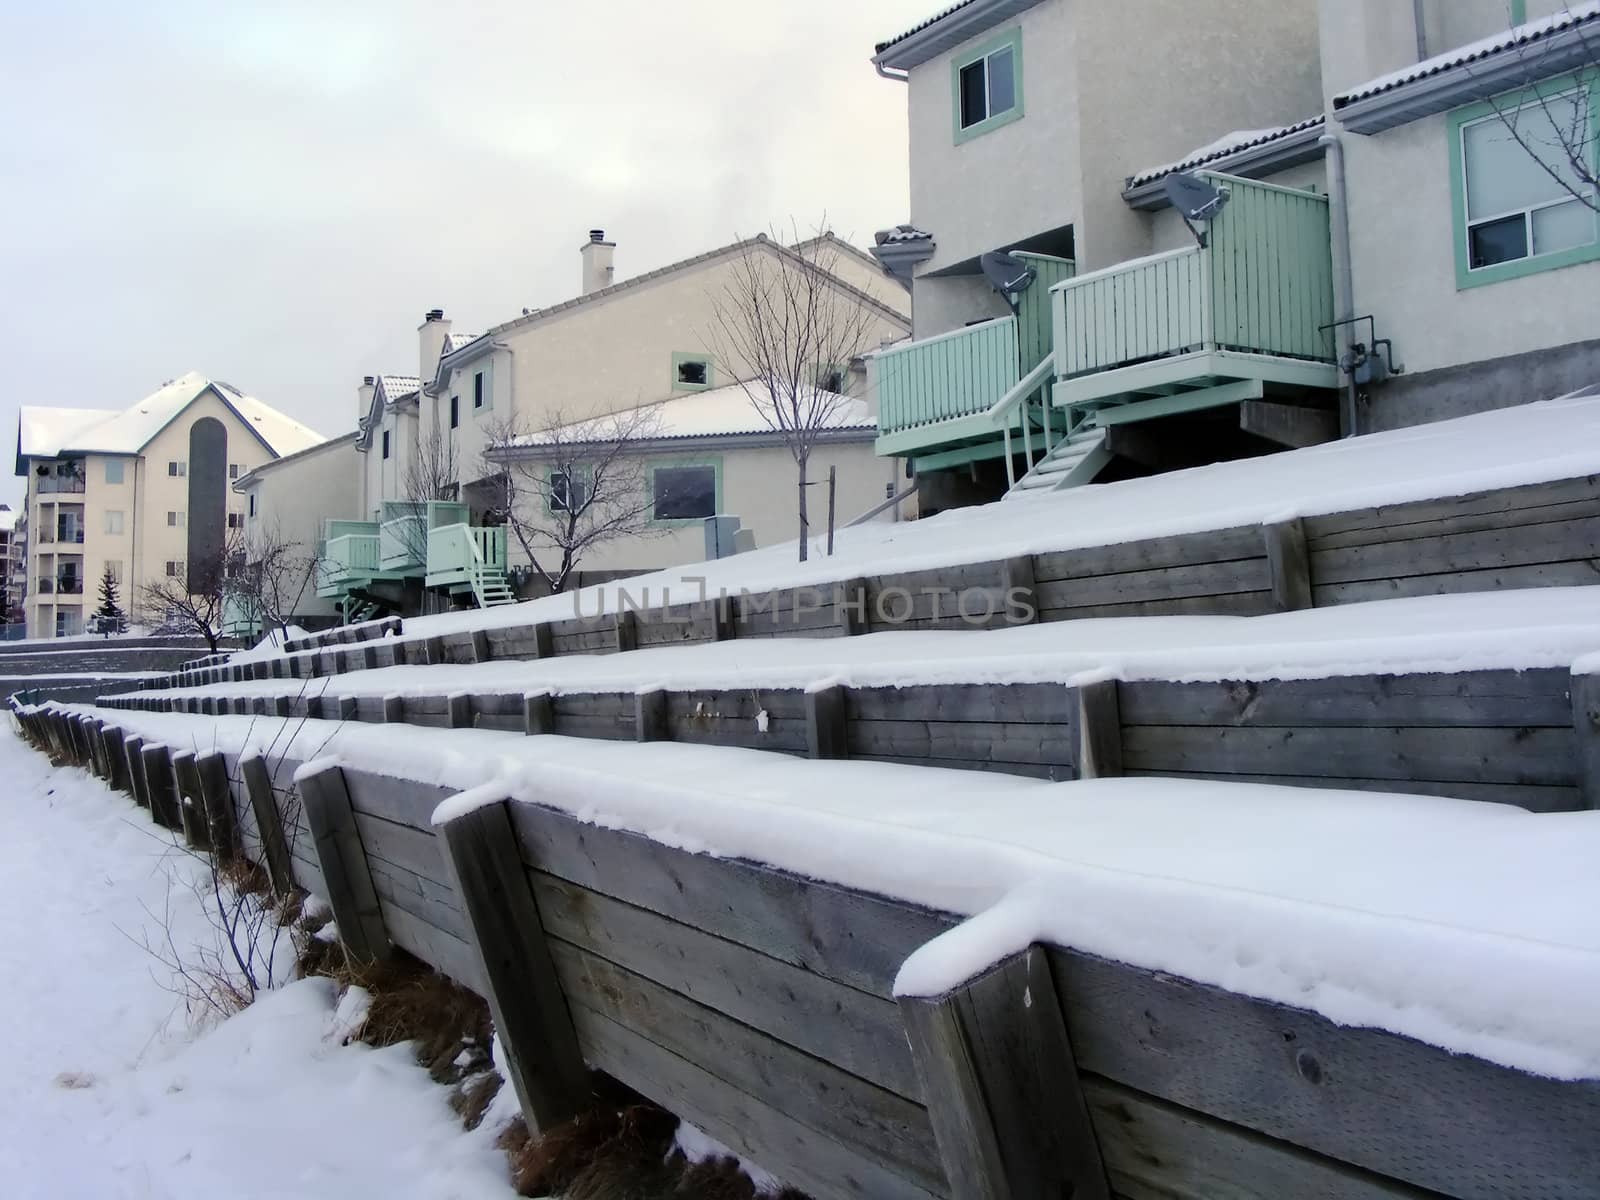 Row of townhouses on a winter afternoon.